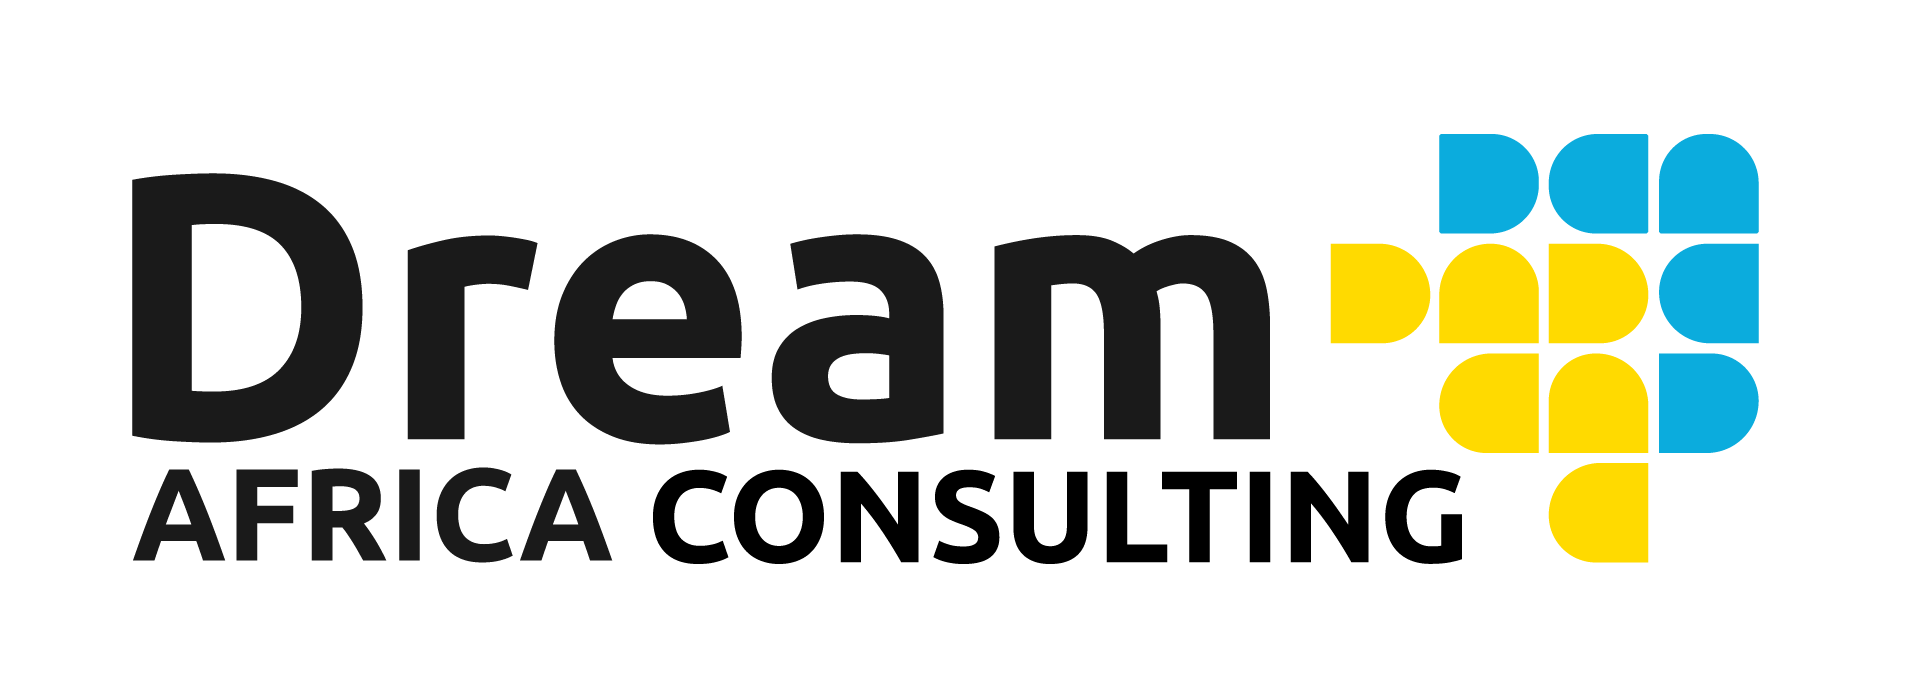 DREAM AFRICAN CONSULTING Company Logo